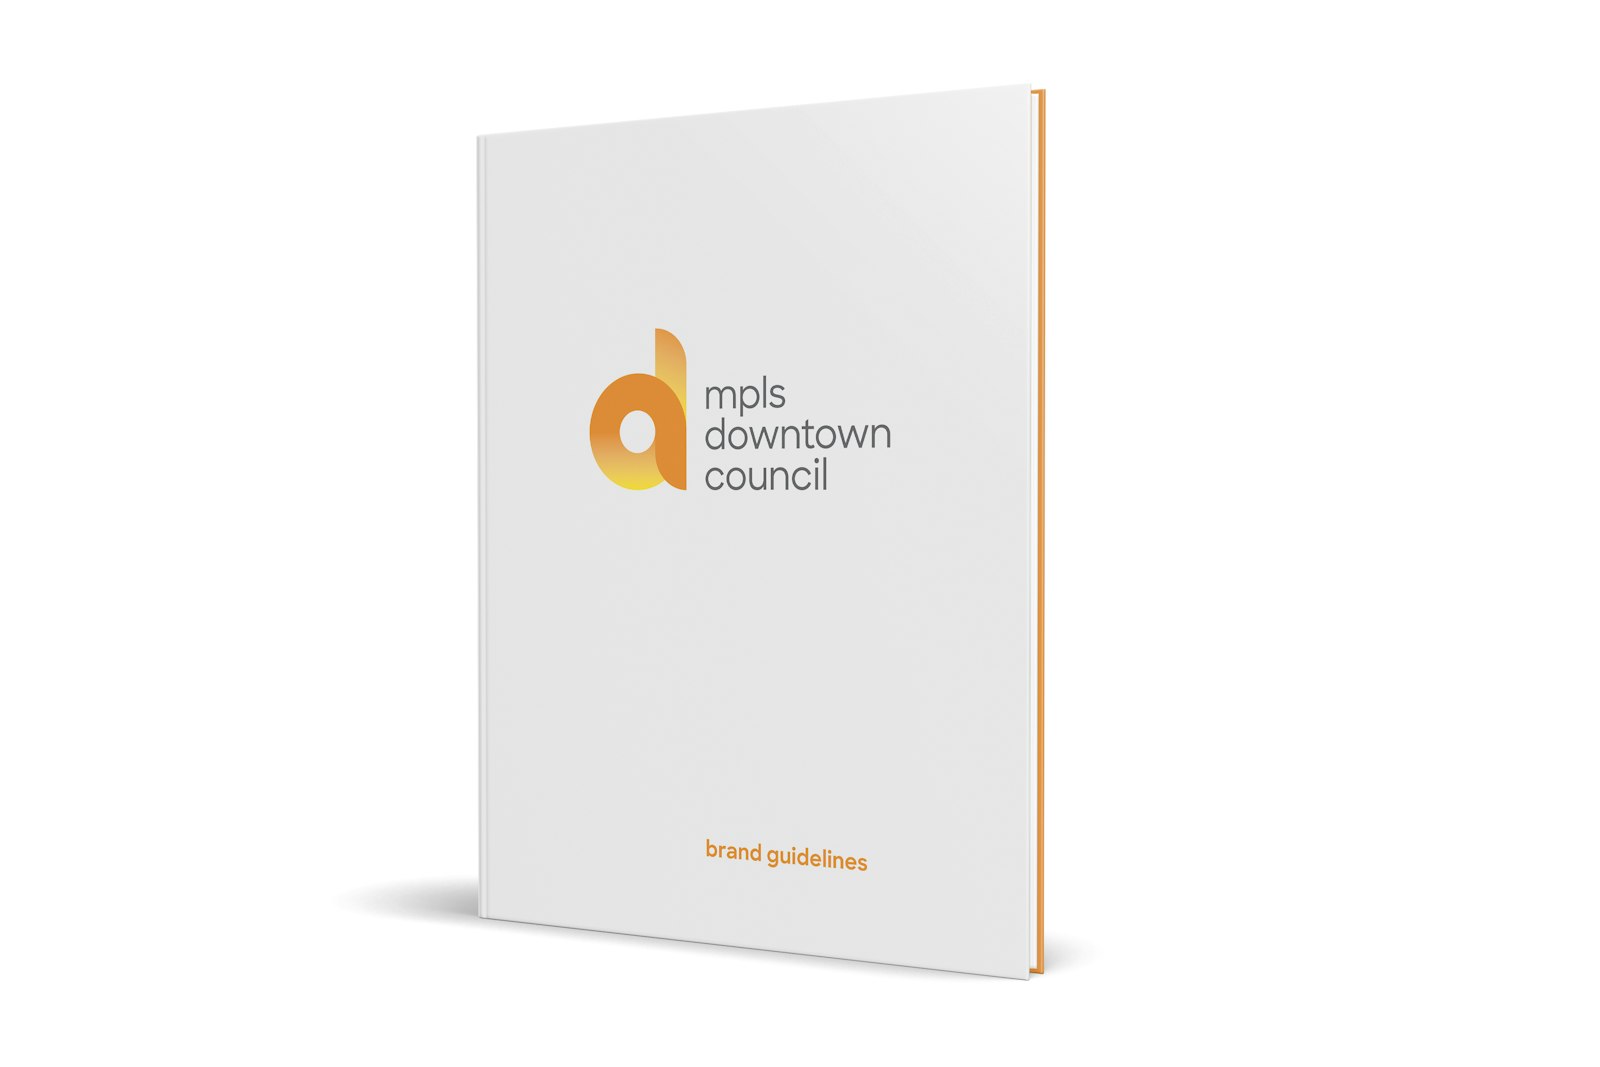 The Minneapolis Downtown Council brand design brochure on white background.